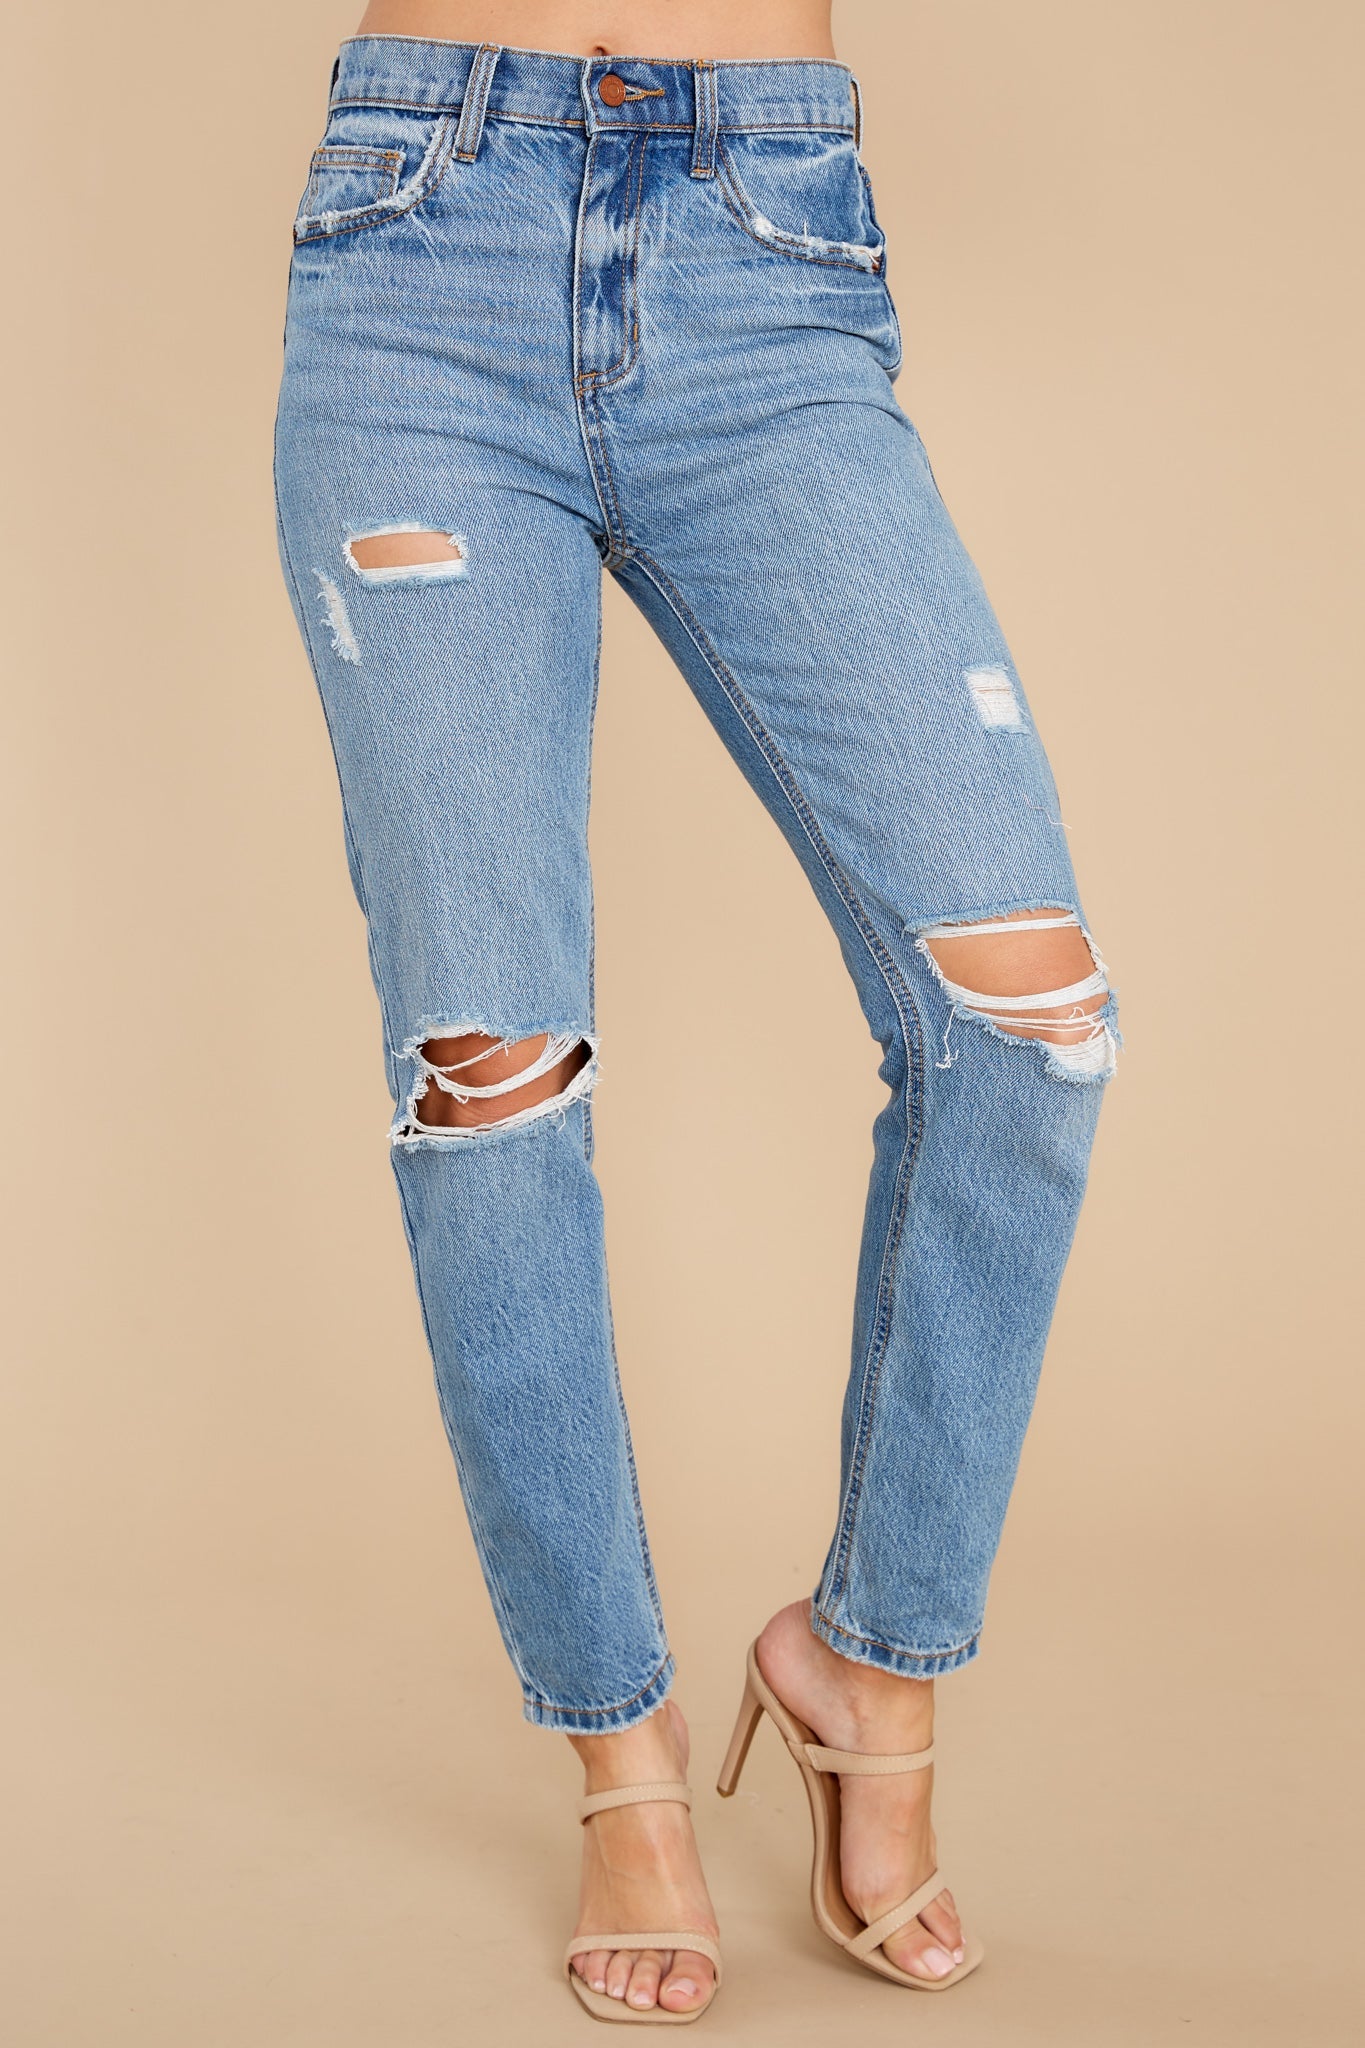 News To Me Medium Wash Distressed Straight Jeans - Red Dress